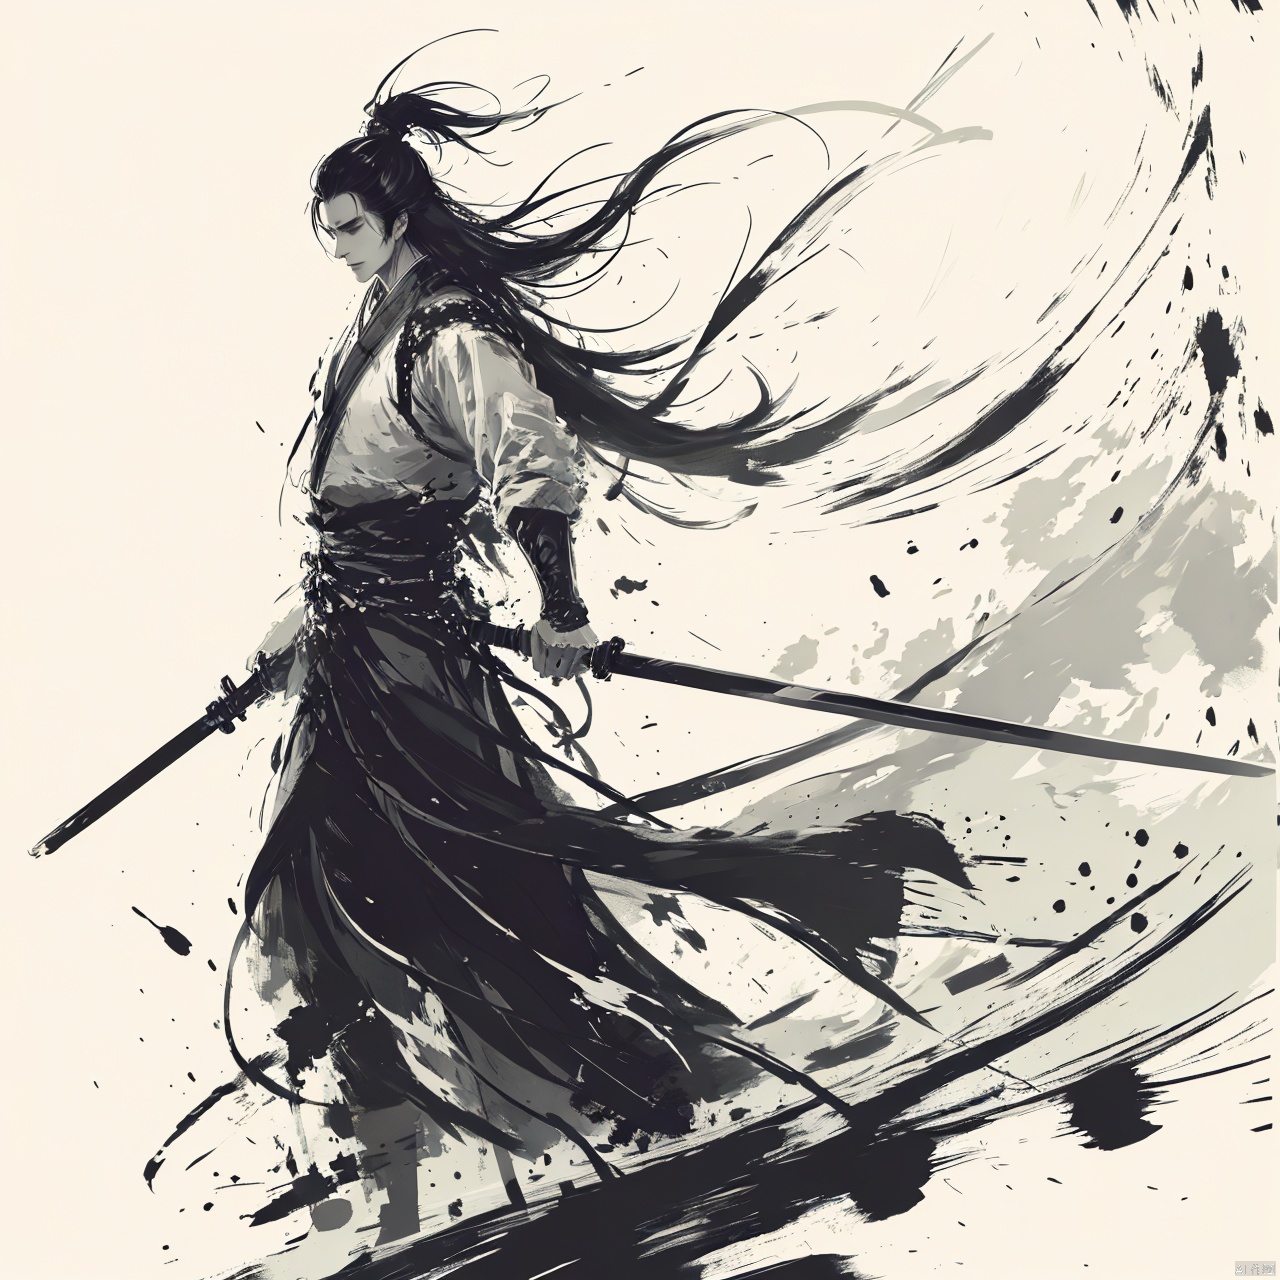  a boy,long hair,black hair,full body,smwuxia,Chinese text,blood splatter,weapon:sw,blood